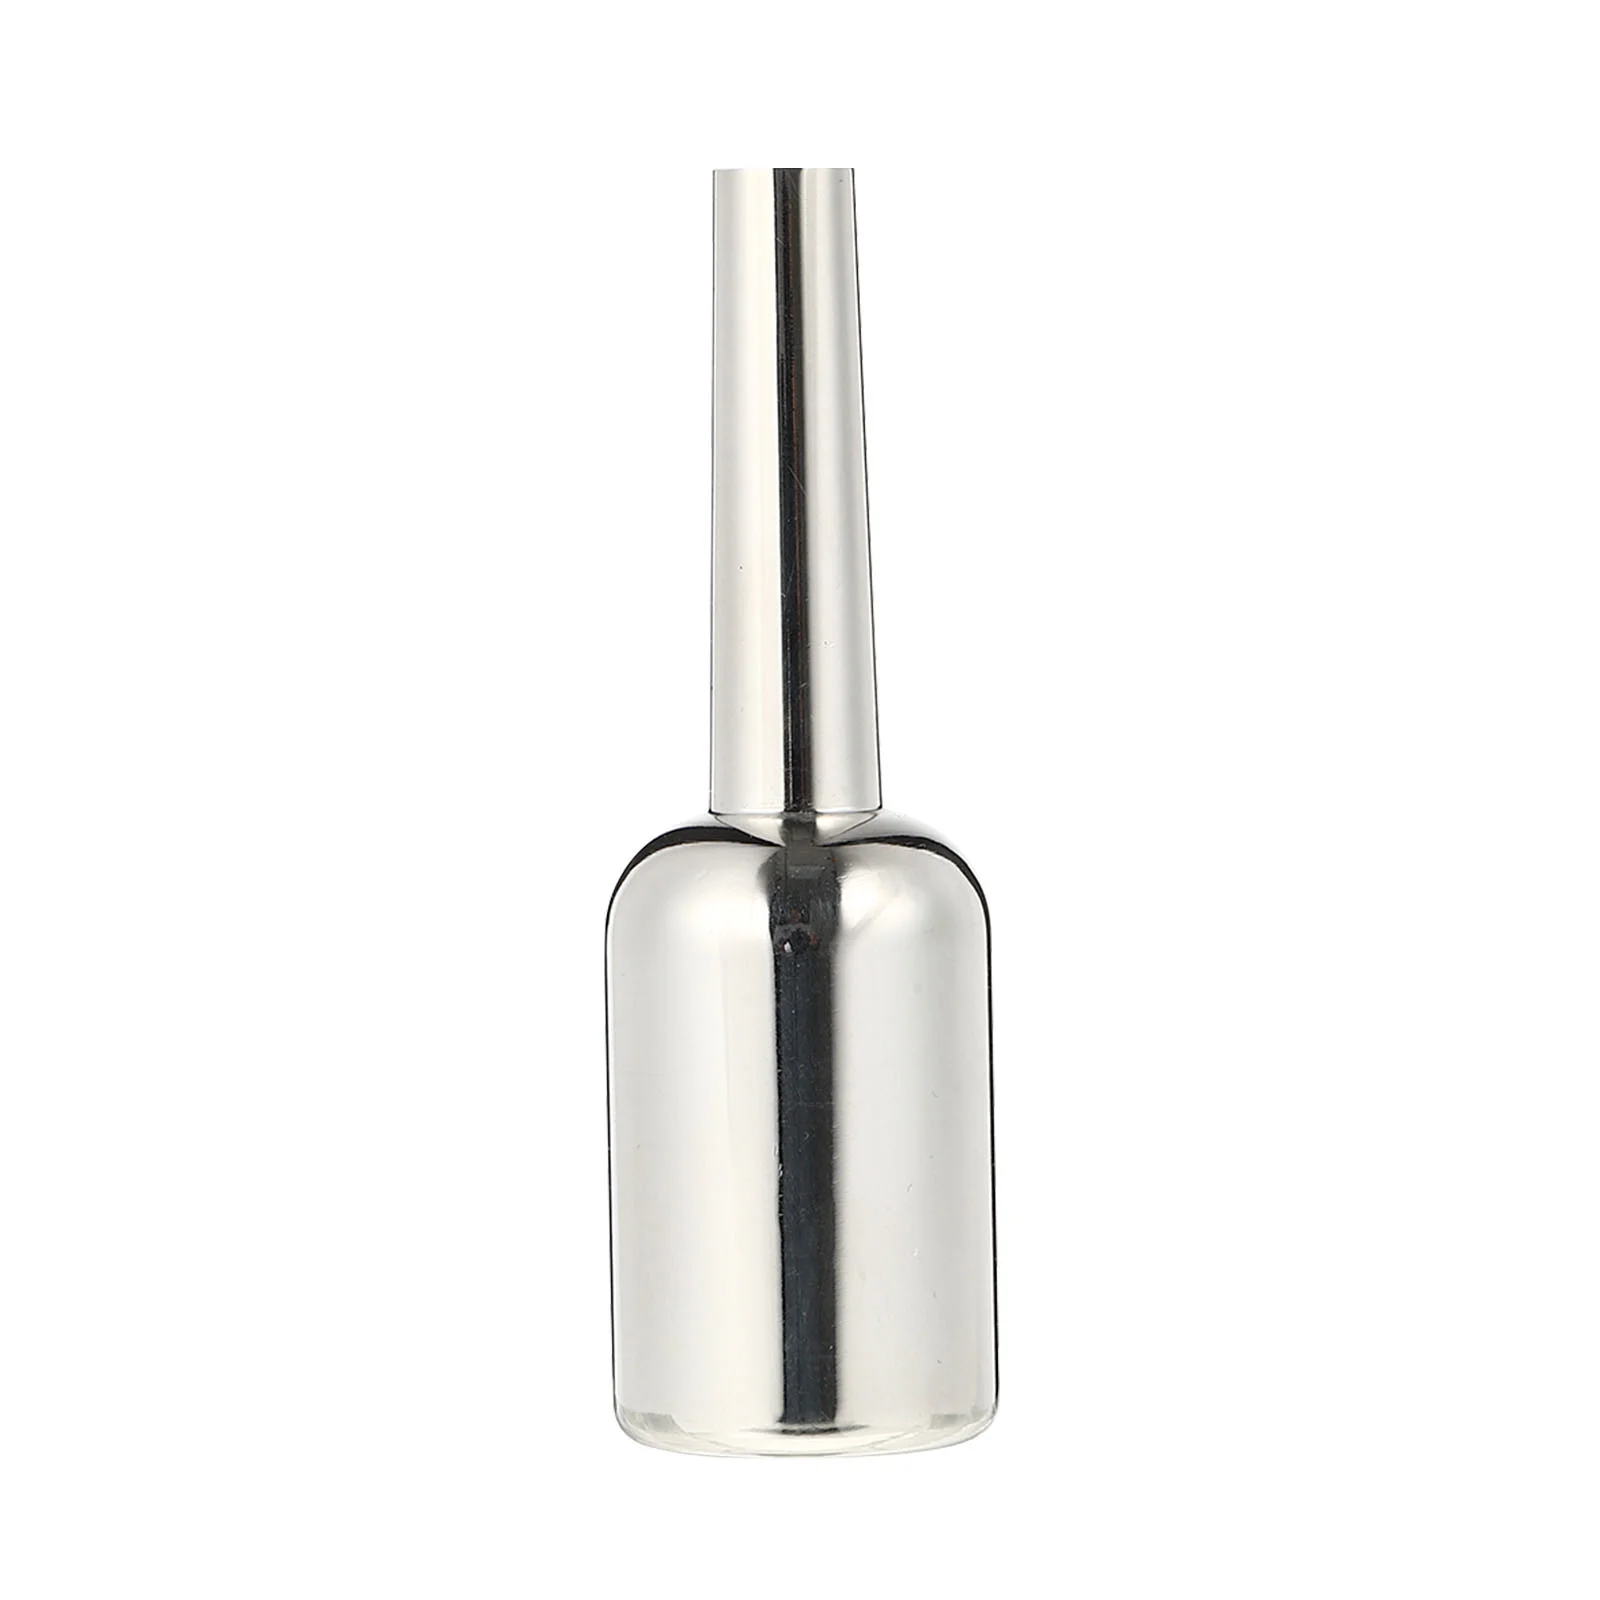 

Trumpet Mouthpiece Practice Silver Plated Embouchure Trainer Trombone Brass Replacement Mute Silencer Accessories French Horn